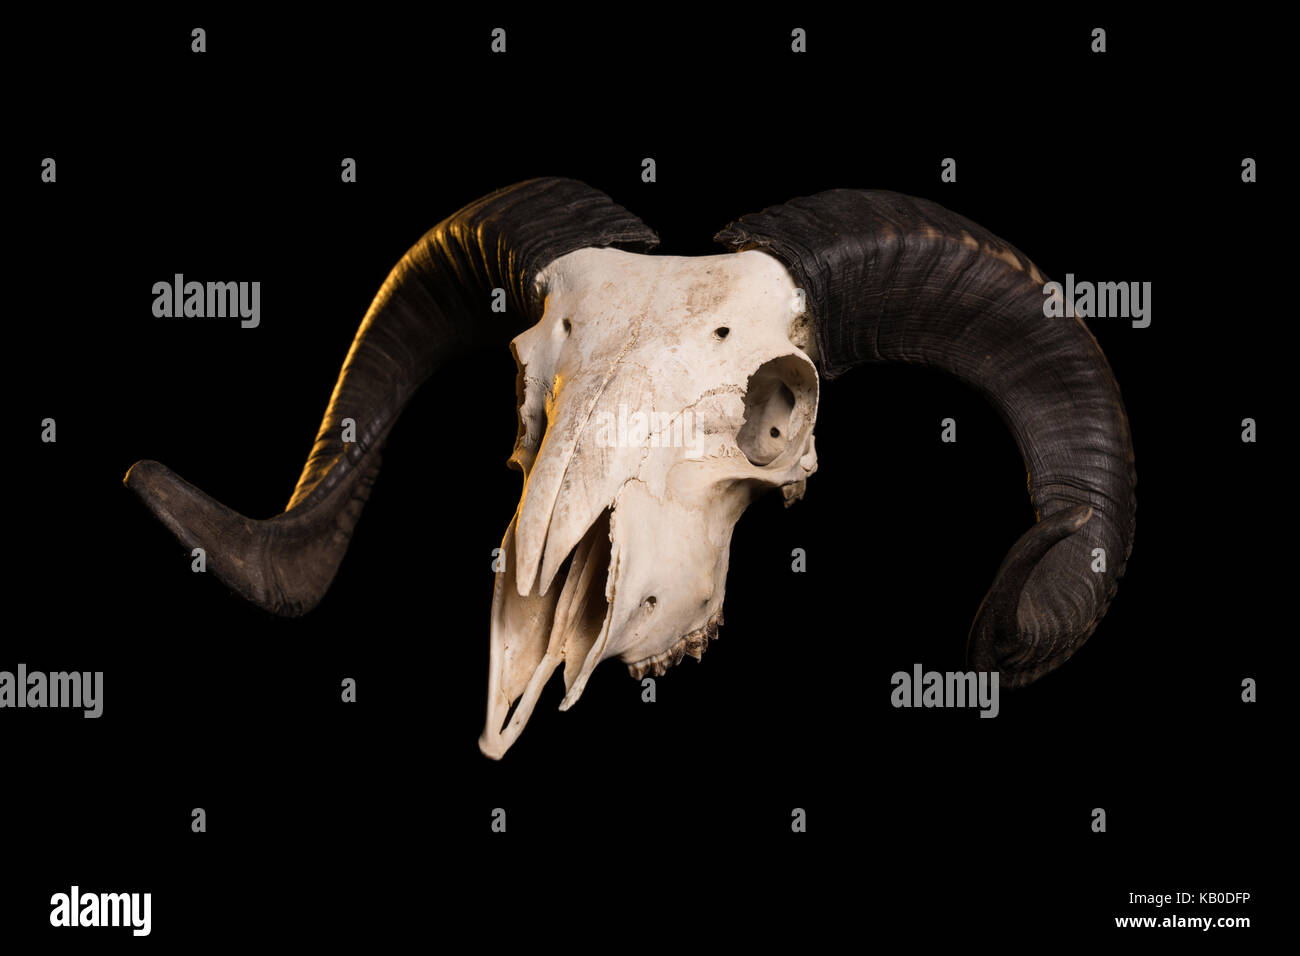 Ram skull with horns, isolated on black background Stock Photo